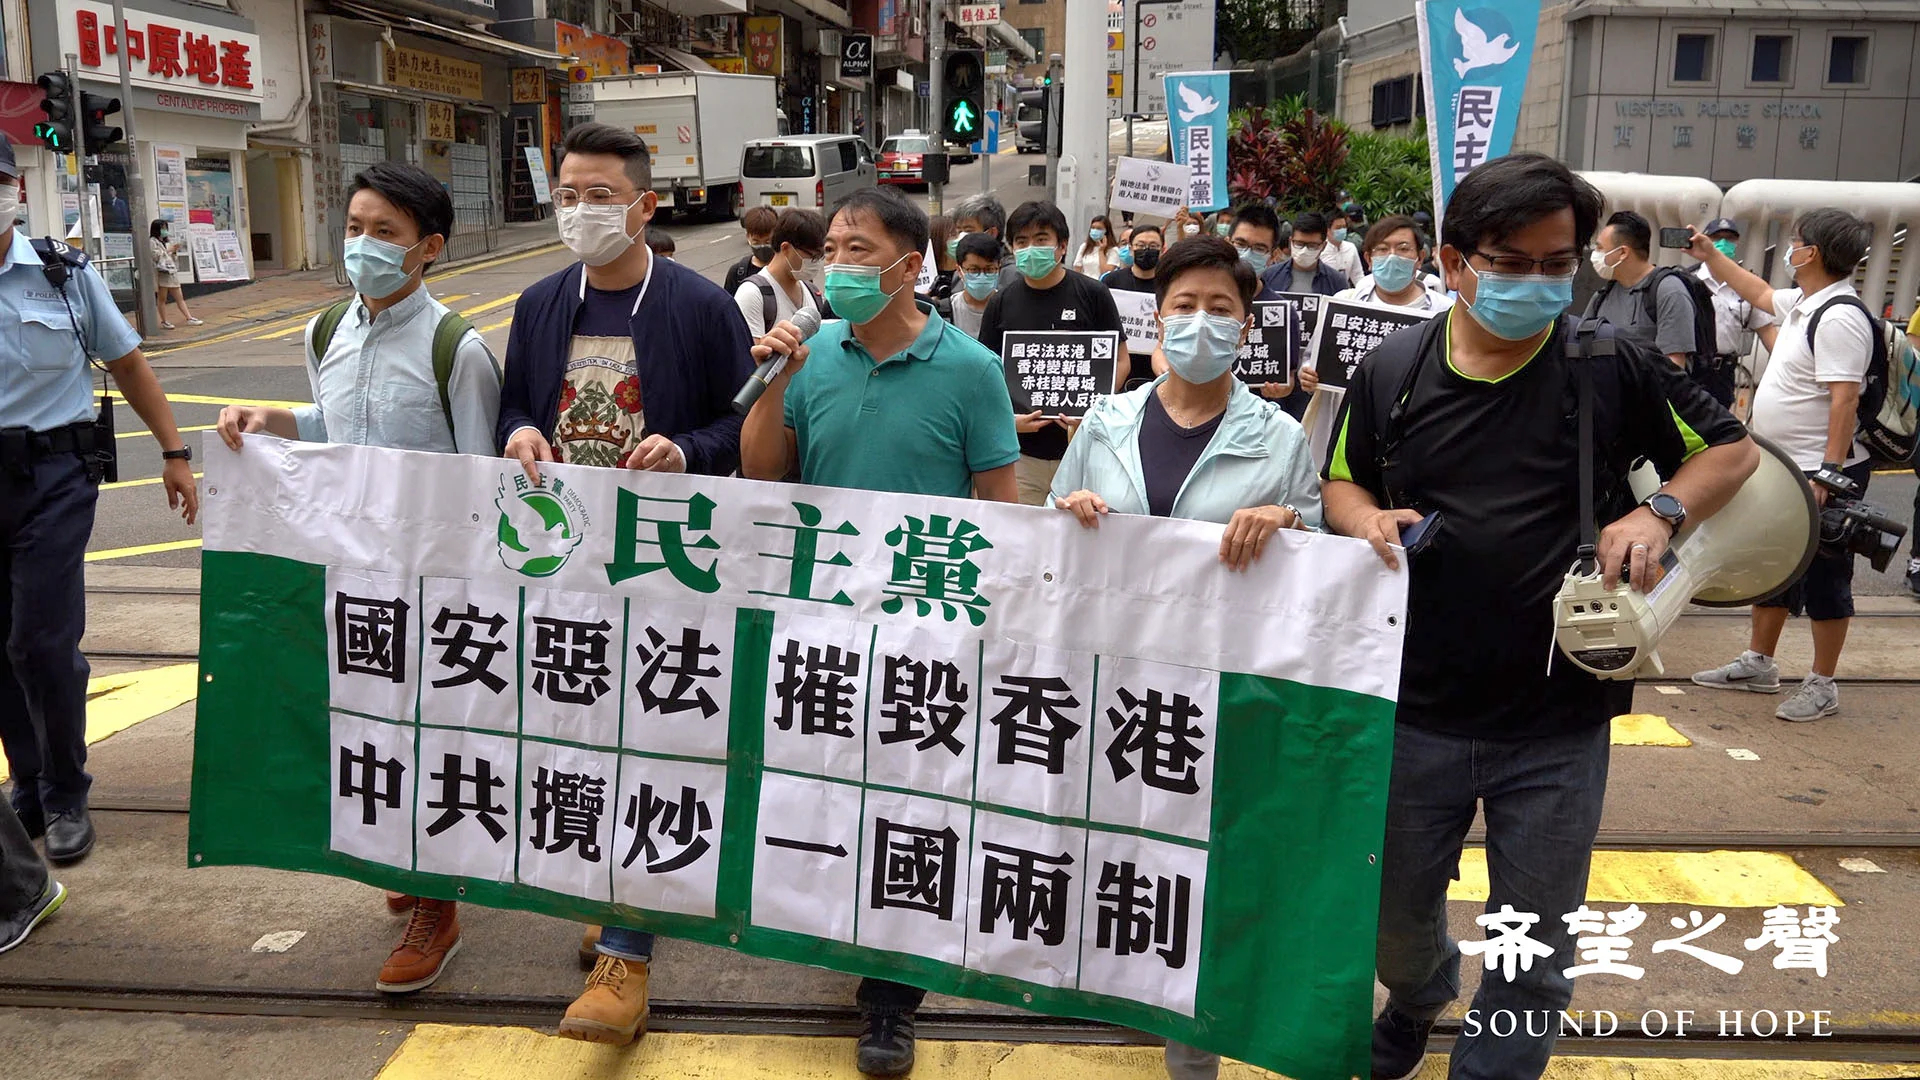 Hong Kong democratic protesters protest national security law on the 22nd